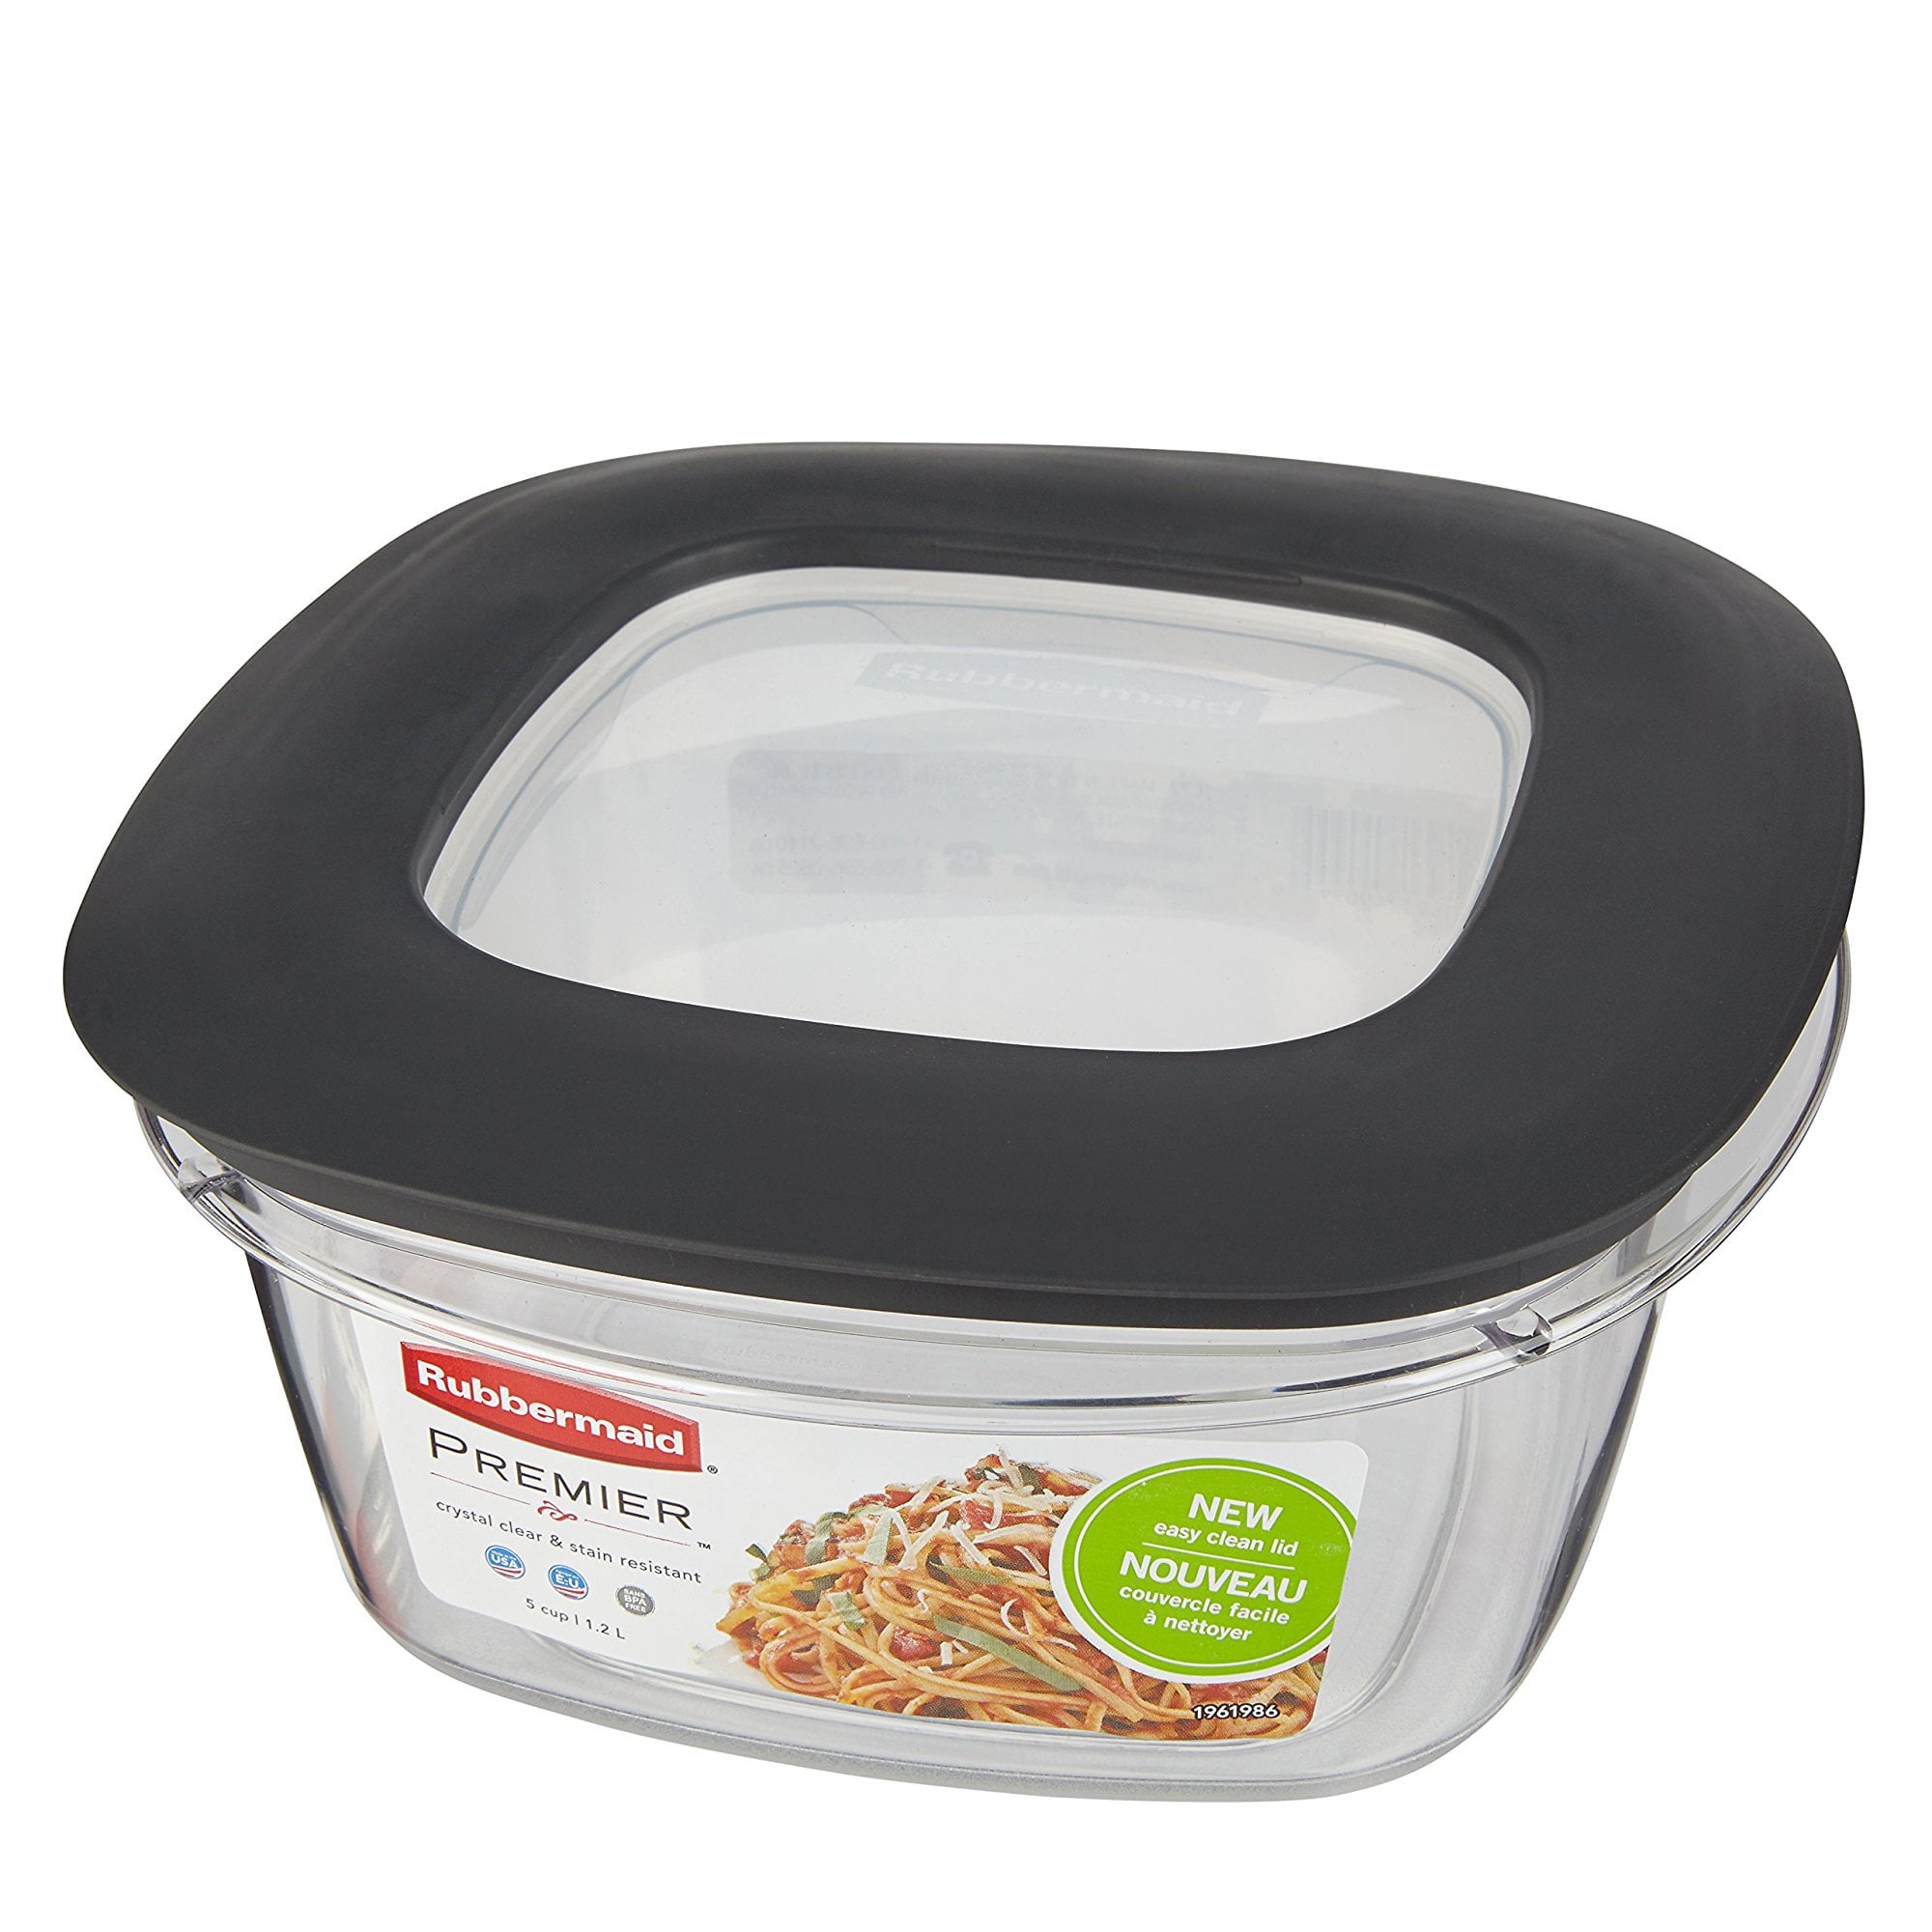 Rubbermaid Premier Container + Lid, 14 Cup